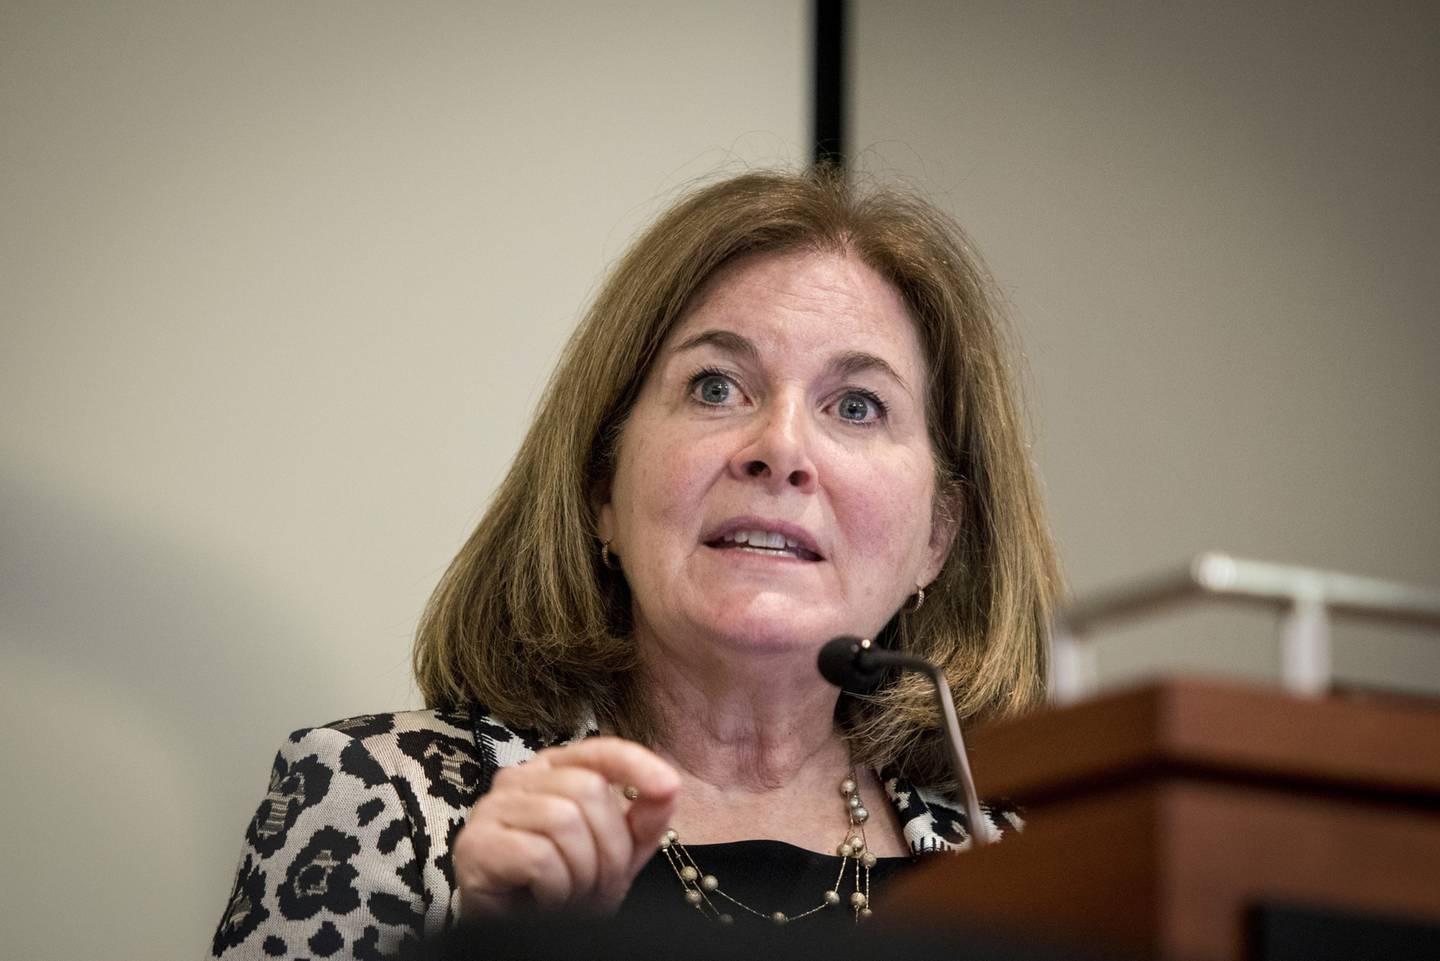 Federal Reserve Bank of Kansas City's president Esther George says the rate-hike debate must include balance sheet